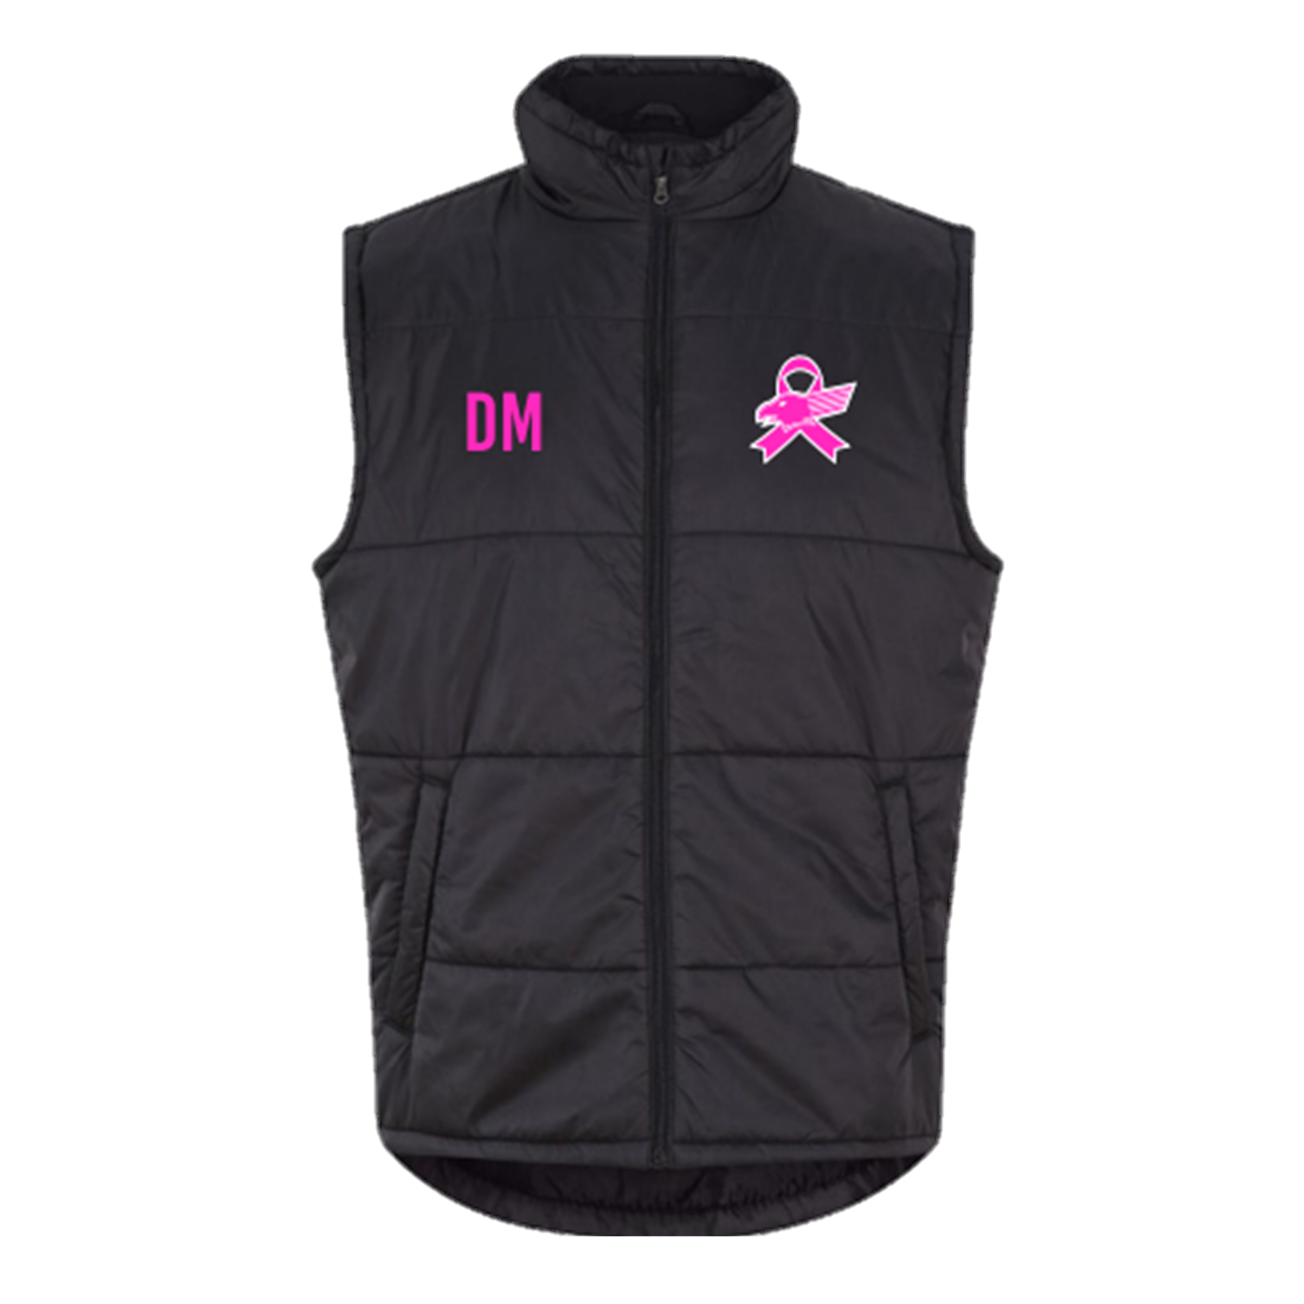 Kewford Eagles Breast Cancer Awareness Charity Gilet [RX551]